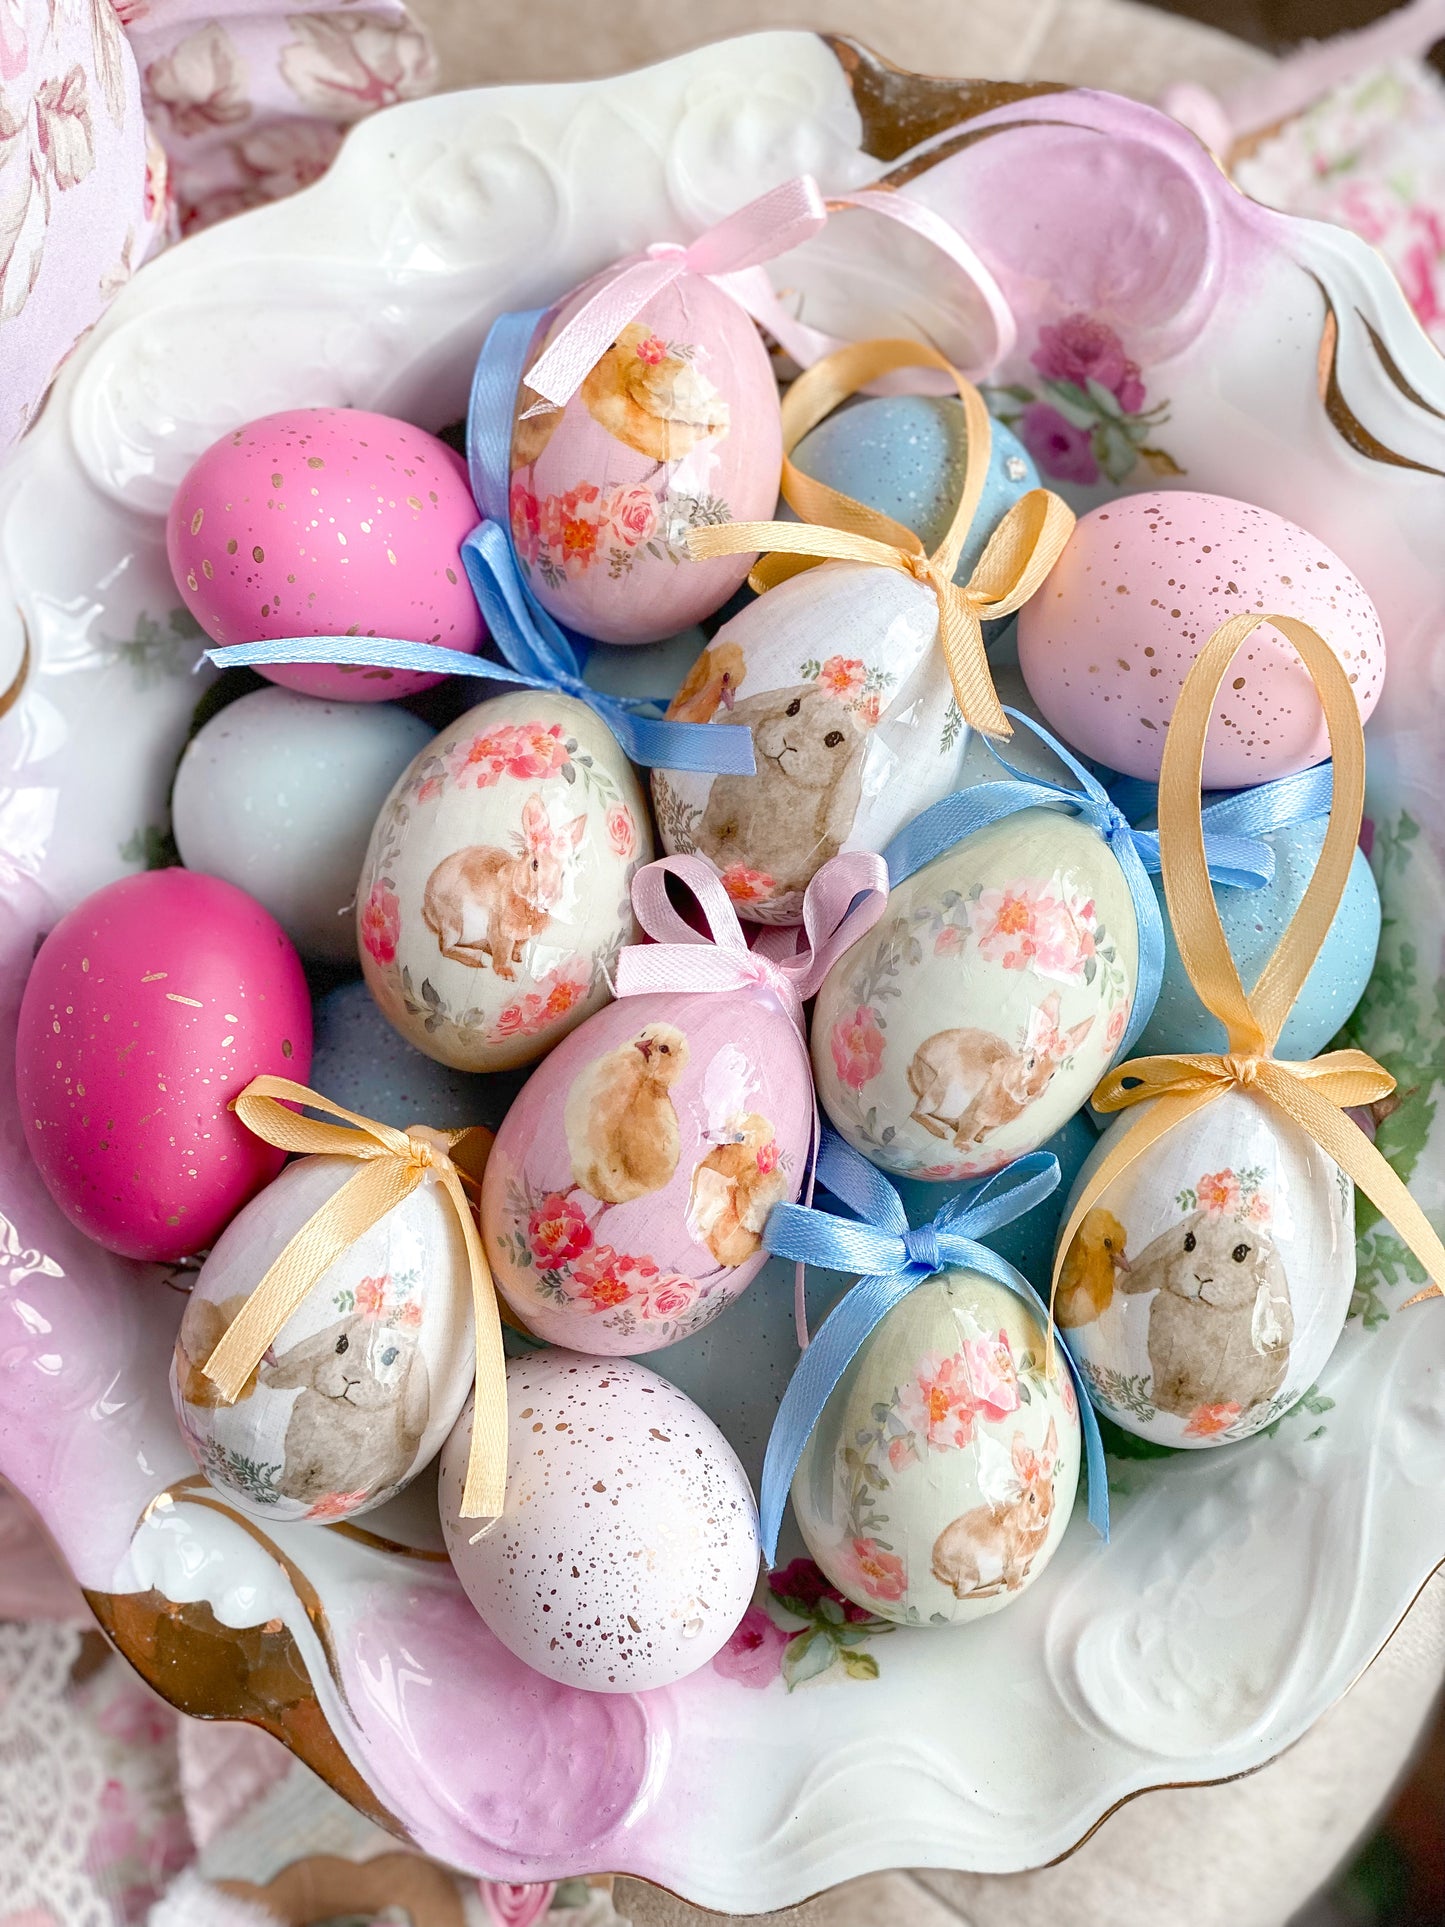 Set of 8 watercolor style Easter egg ornaments